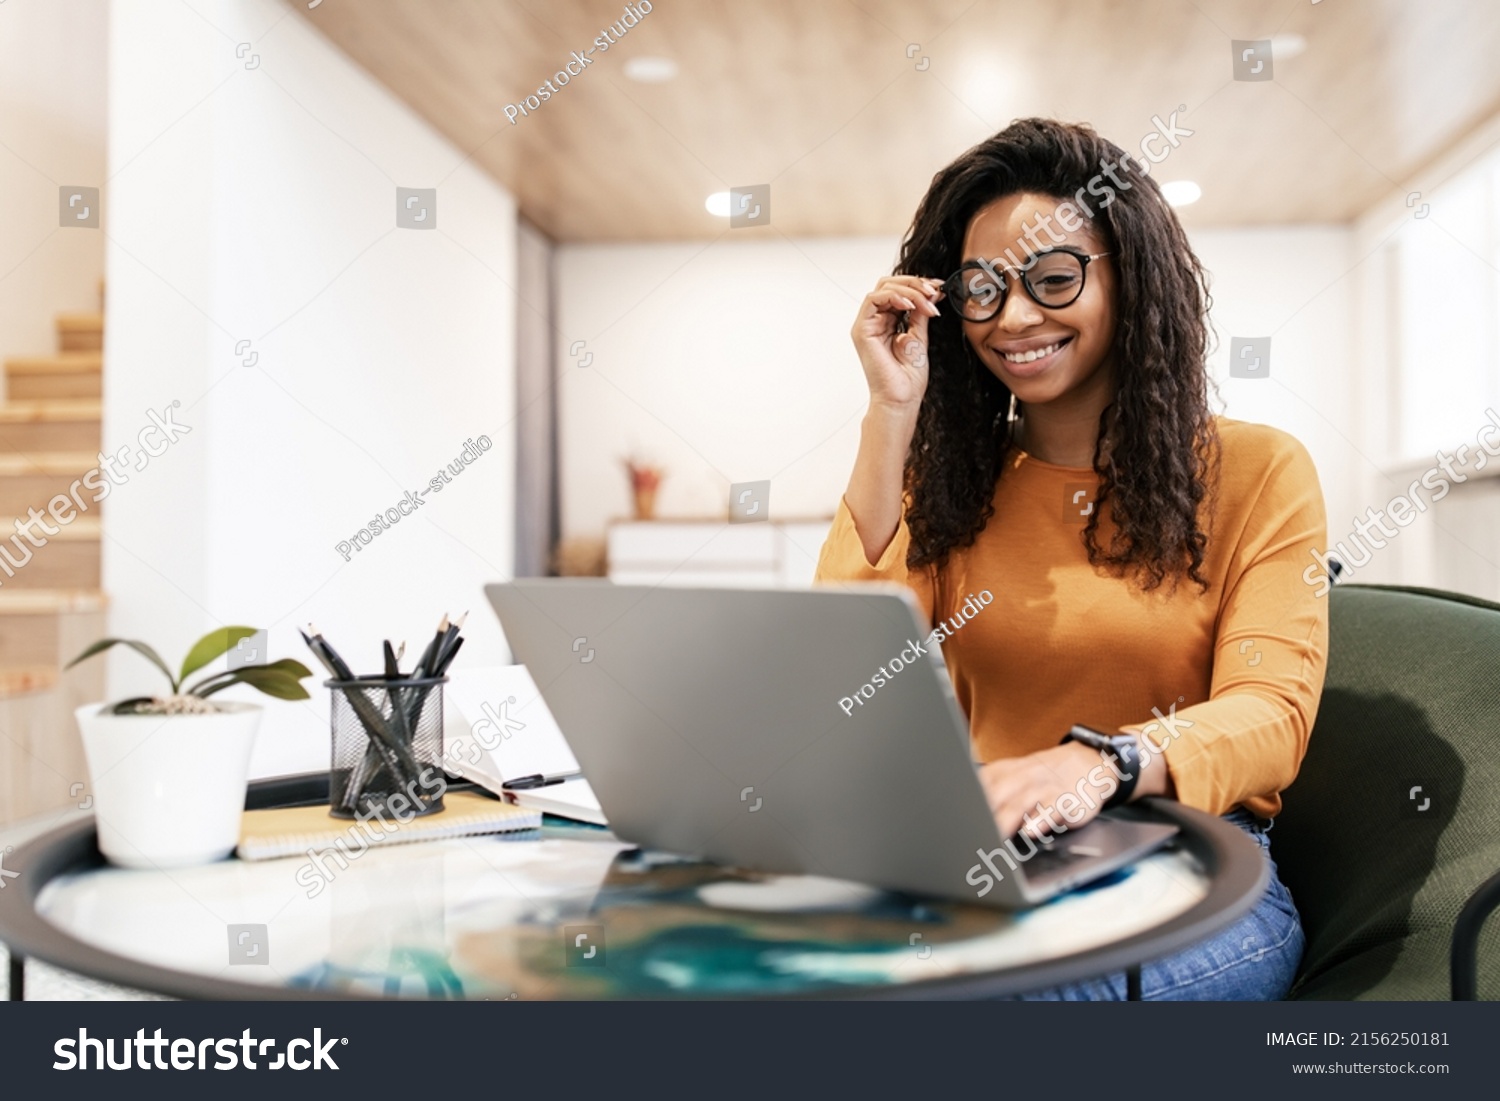 People And Technology. Portrait of young black woman wearing eyeglasses using pc sitting at table on beanbag chair in living room, typing on keyboard. Cheerful lady browsing internet, free copy space #2156250181